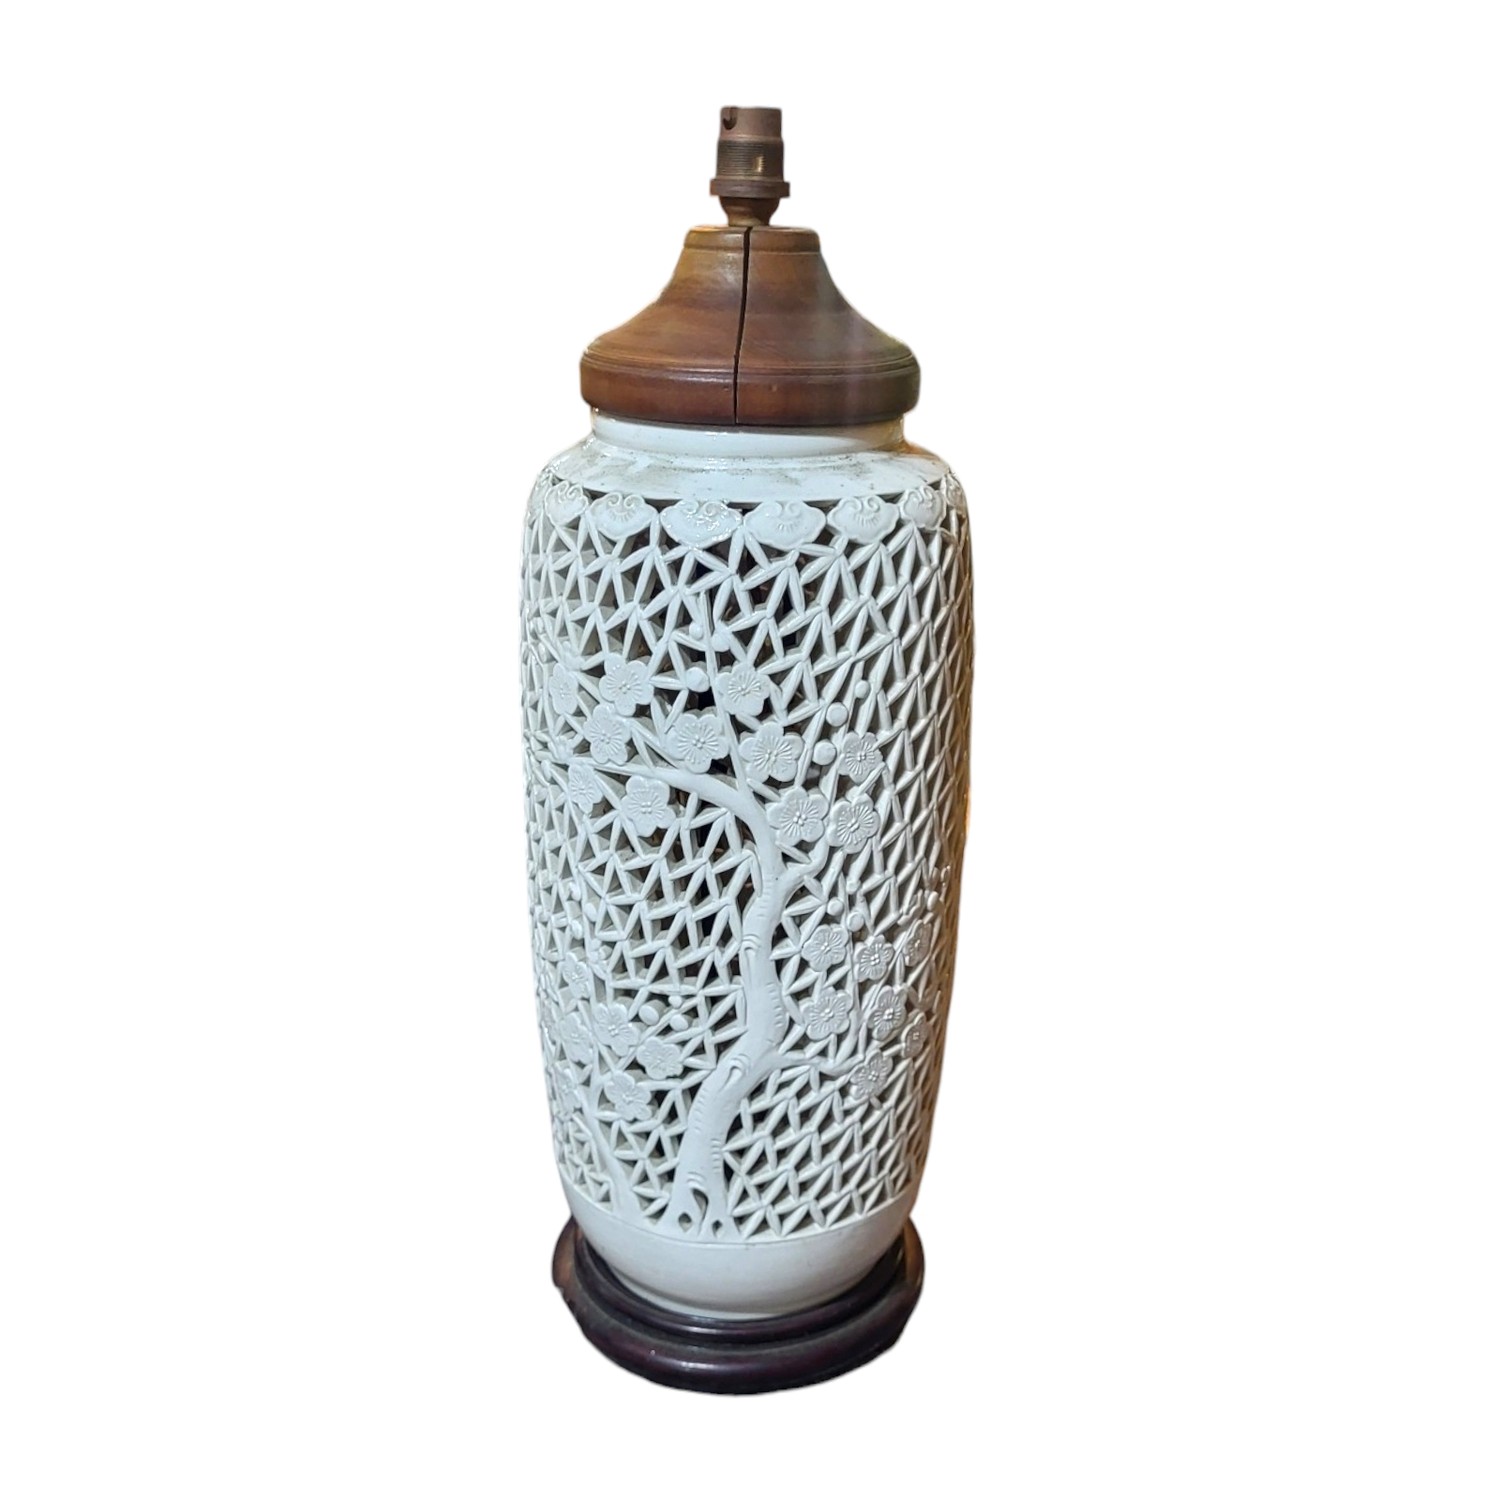 A CHINESE LATE QING DYNASTY BLANC DE CHINE PORCELAIN RETICULATED LAMP Decorated with openwork - Image 3 of 3